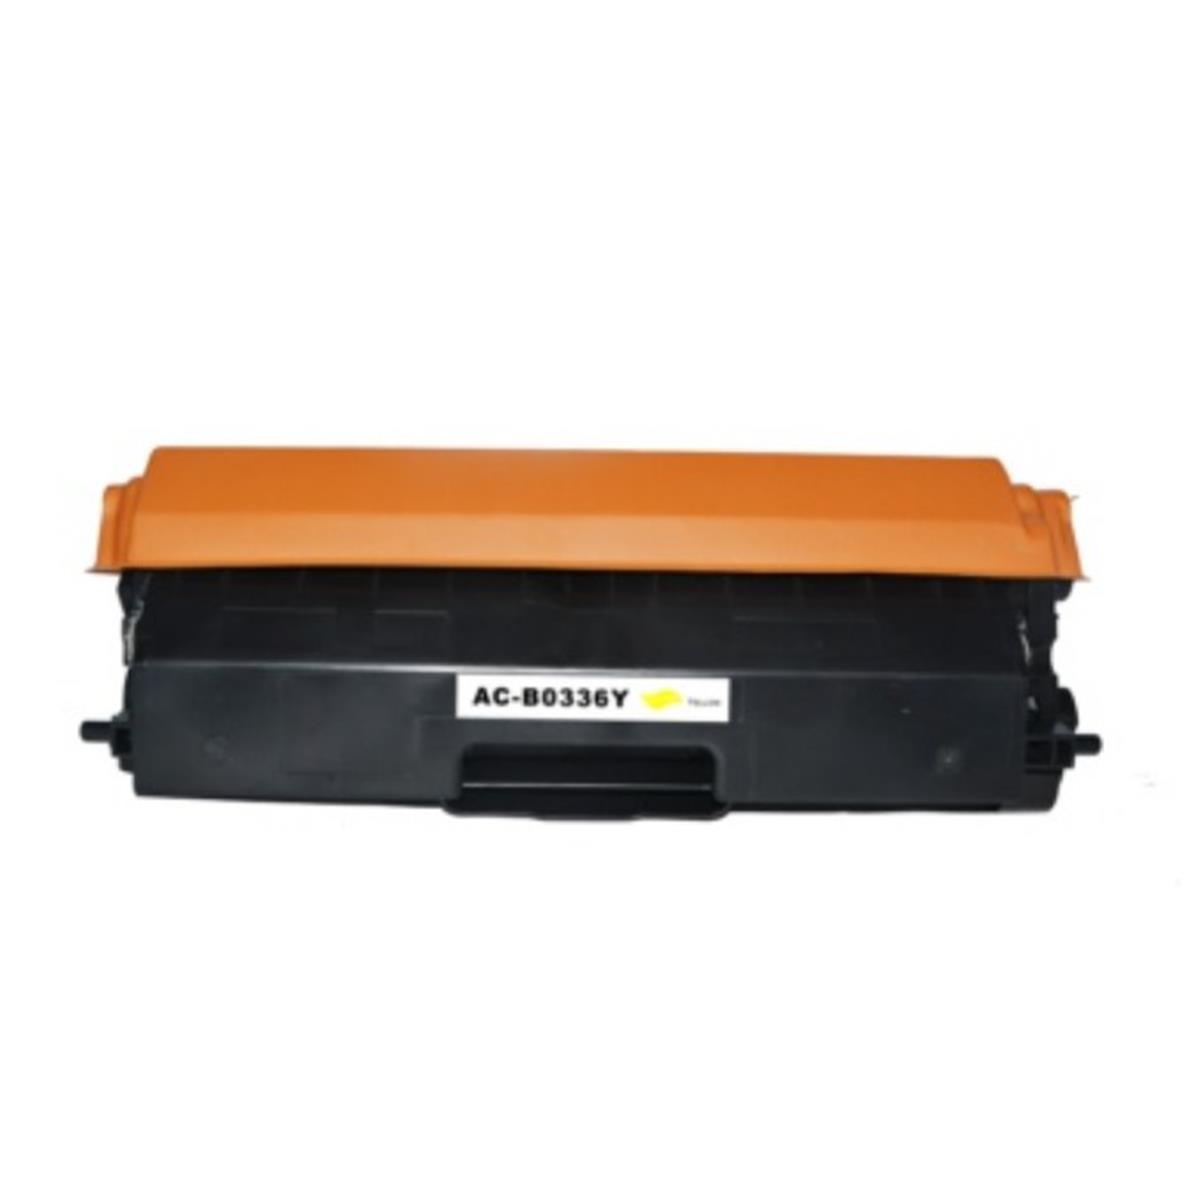 Picture of Aster AP-B0336Y Yellow Toner Cartridge for Compatible OEM No.TN336Y - 3500 Page Yield